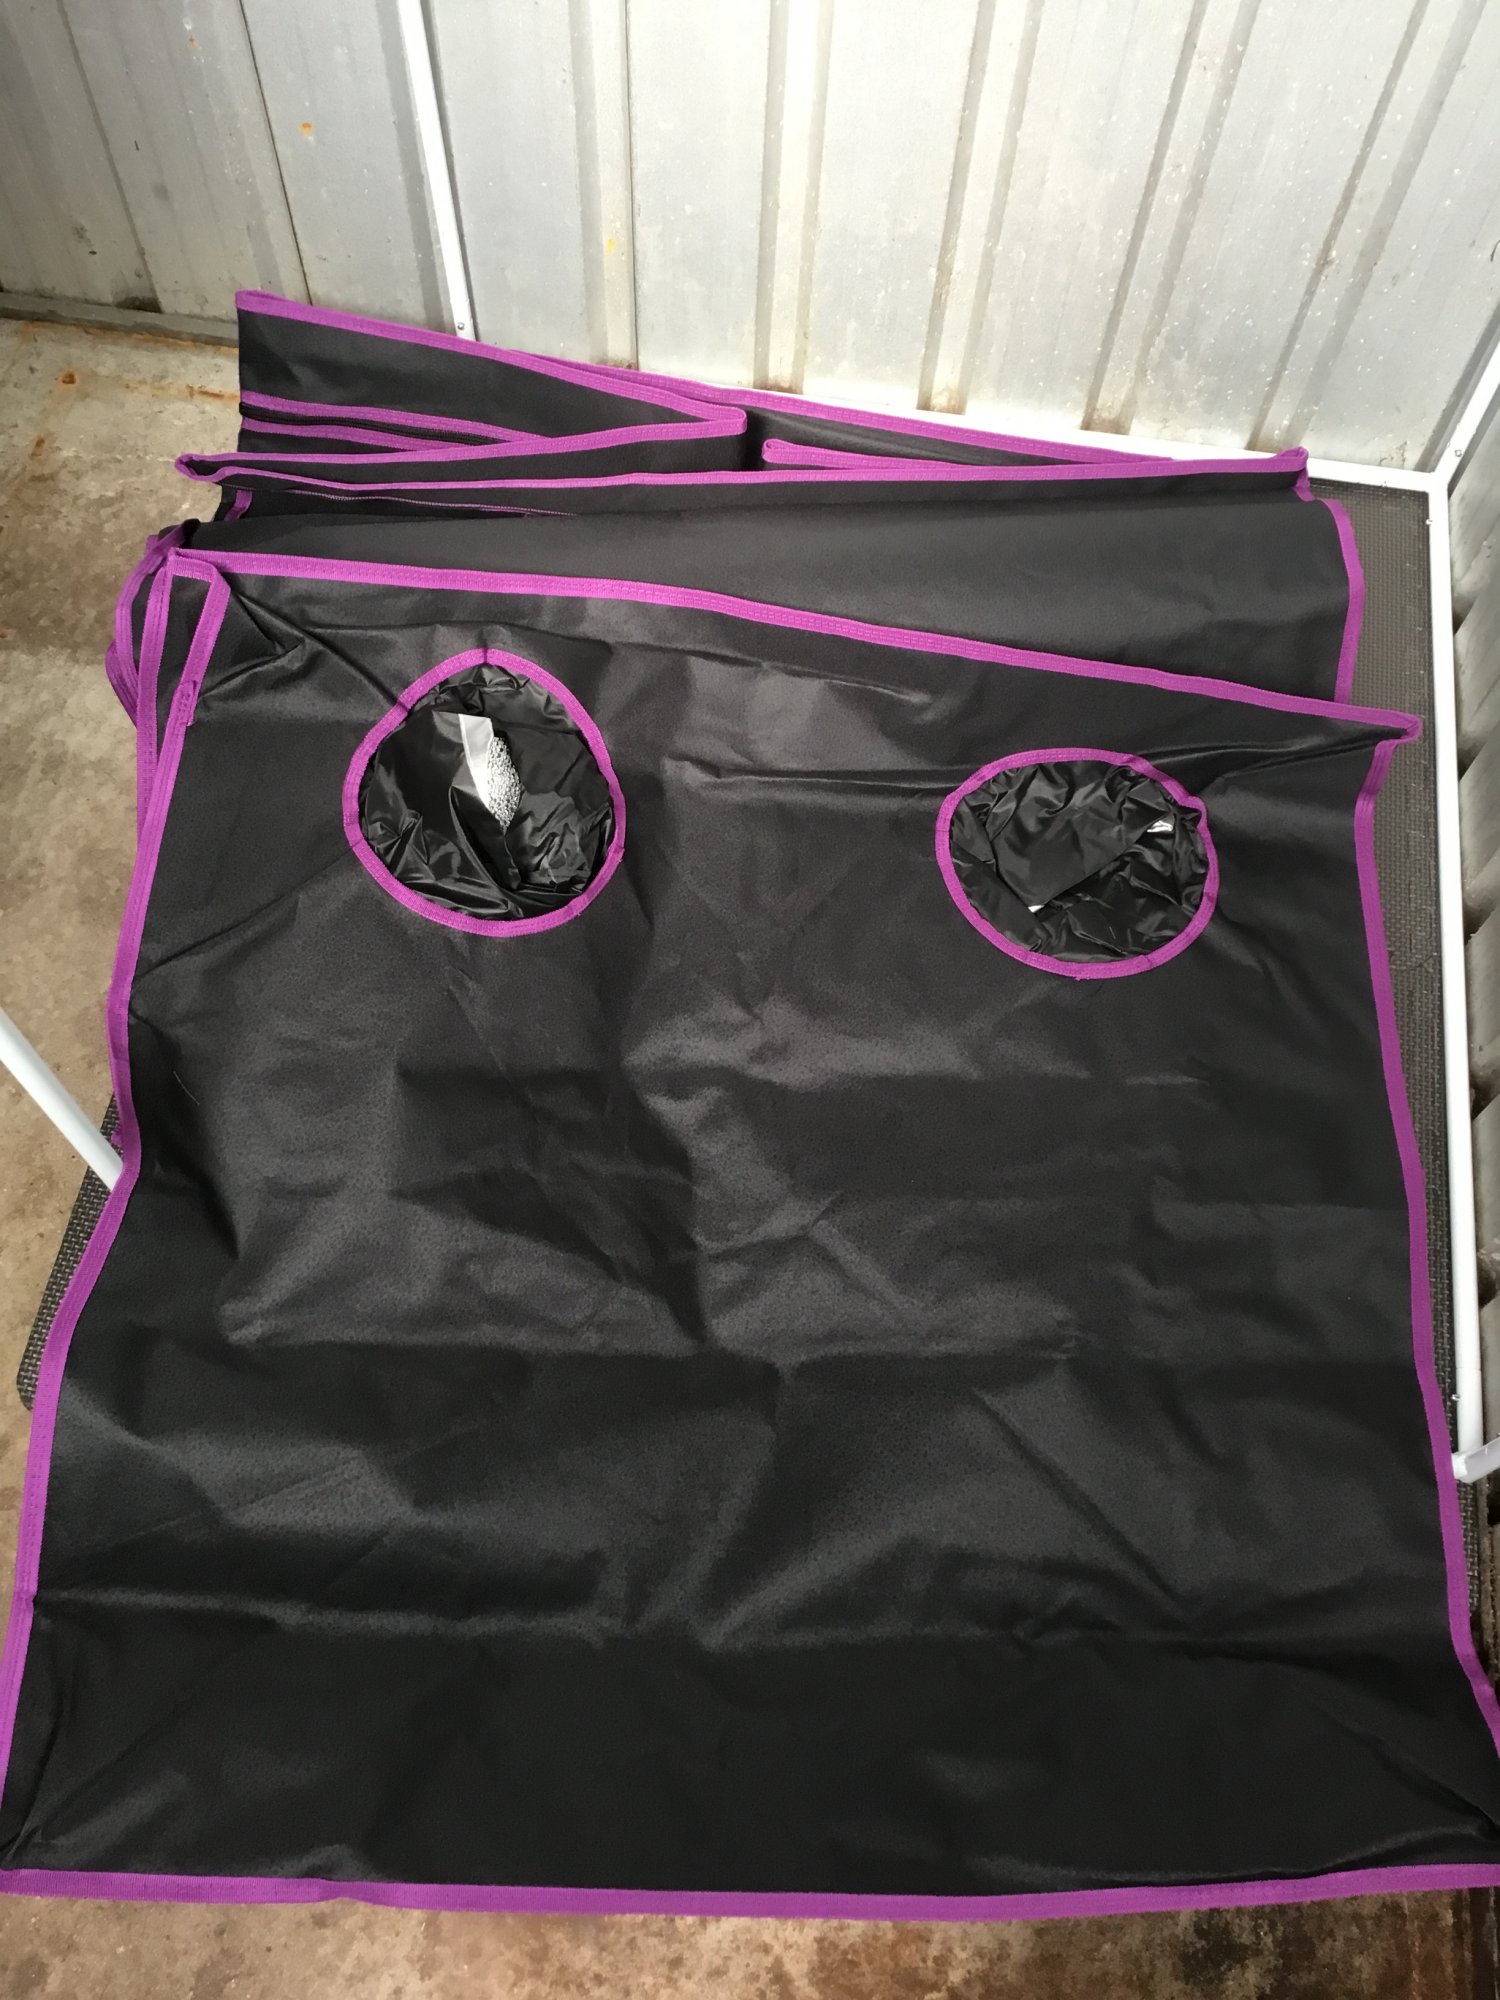 Spider farmer tent review oh look less than 5 words 4